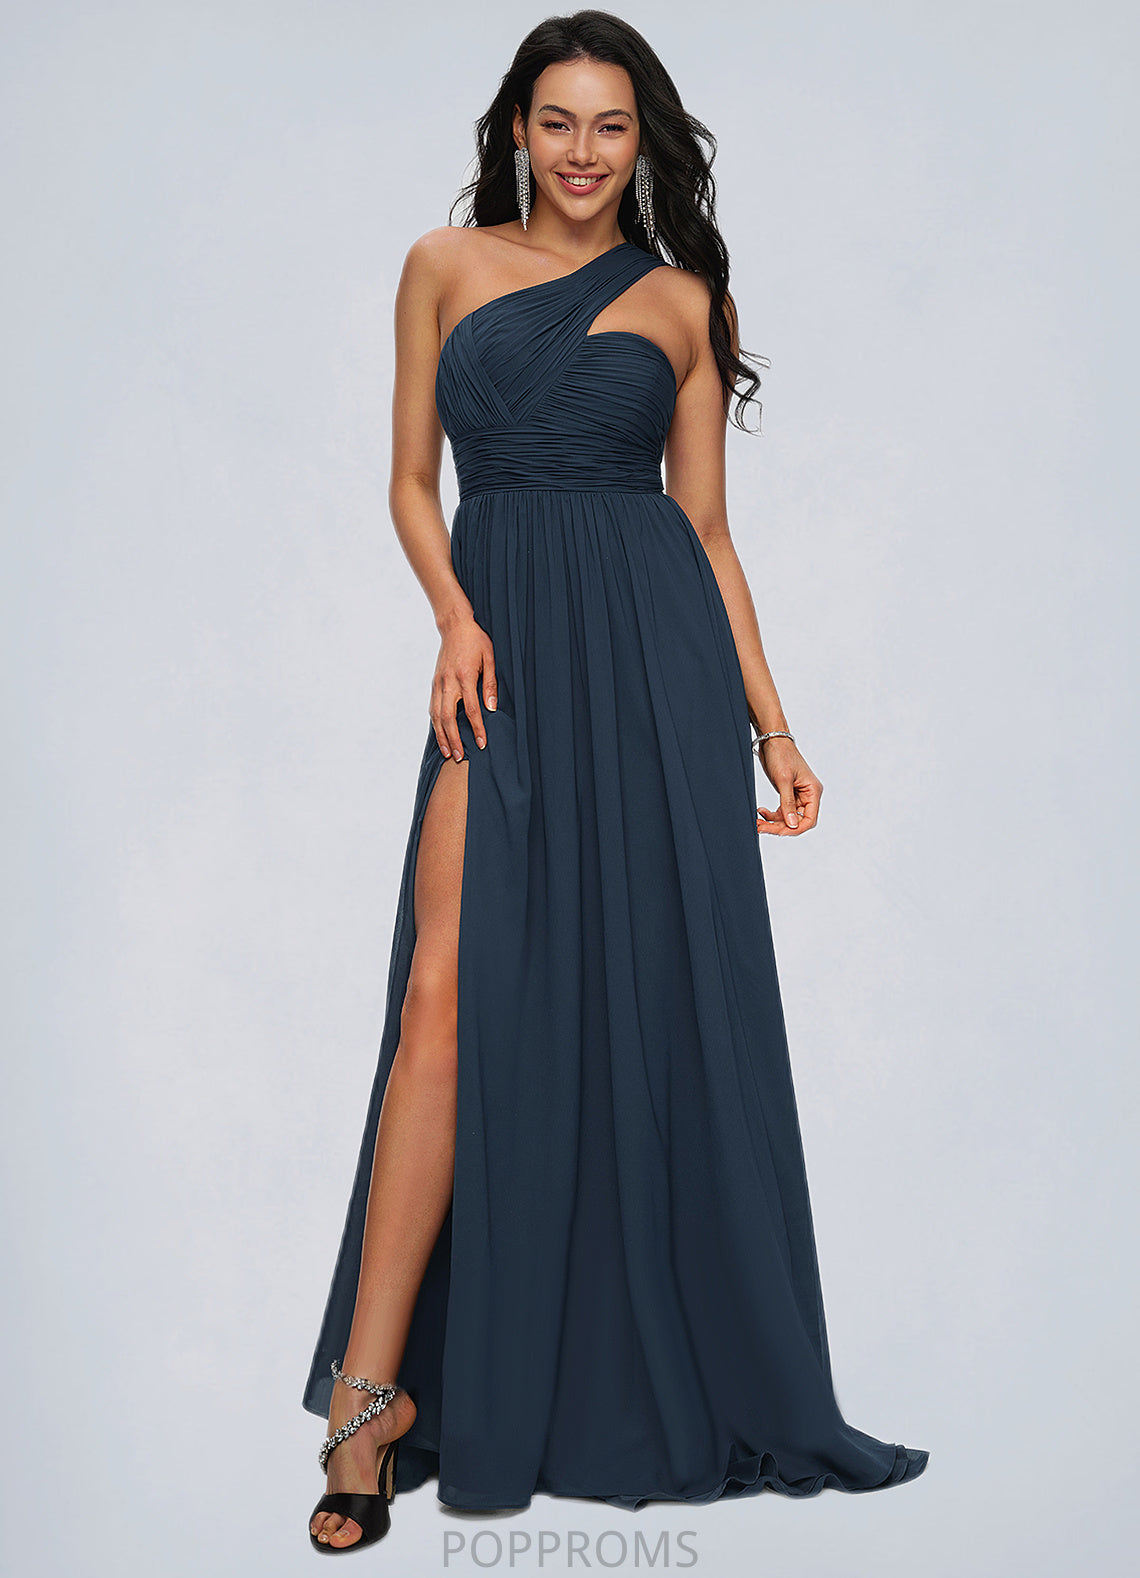 Cali A-line Asymmetrical Sweep Train Chiffon Prom Dresses With Pleated PP6P0022212